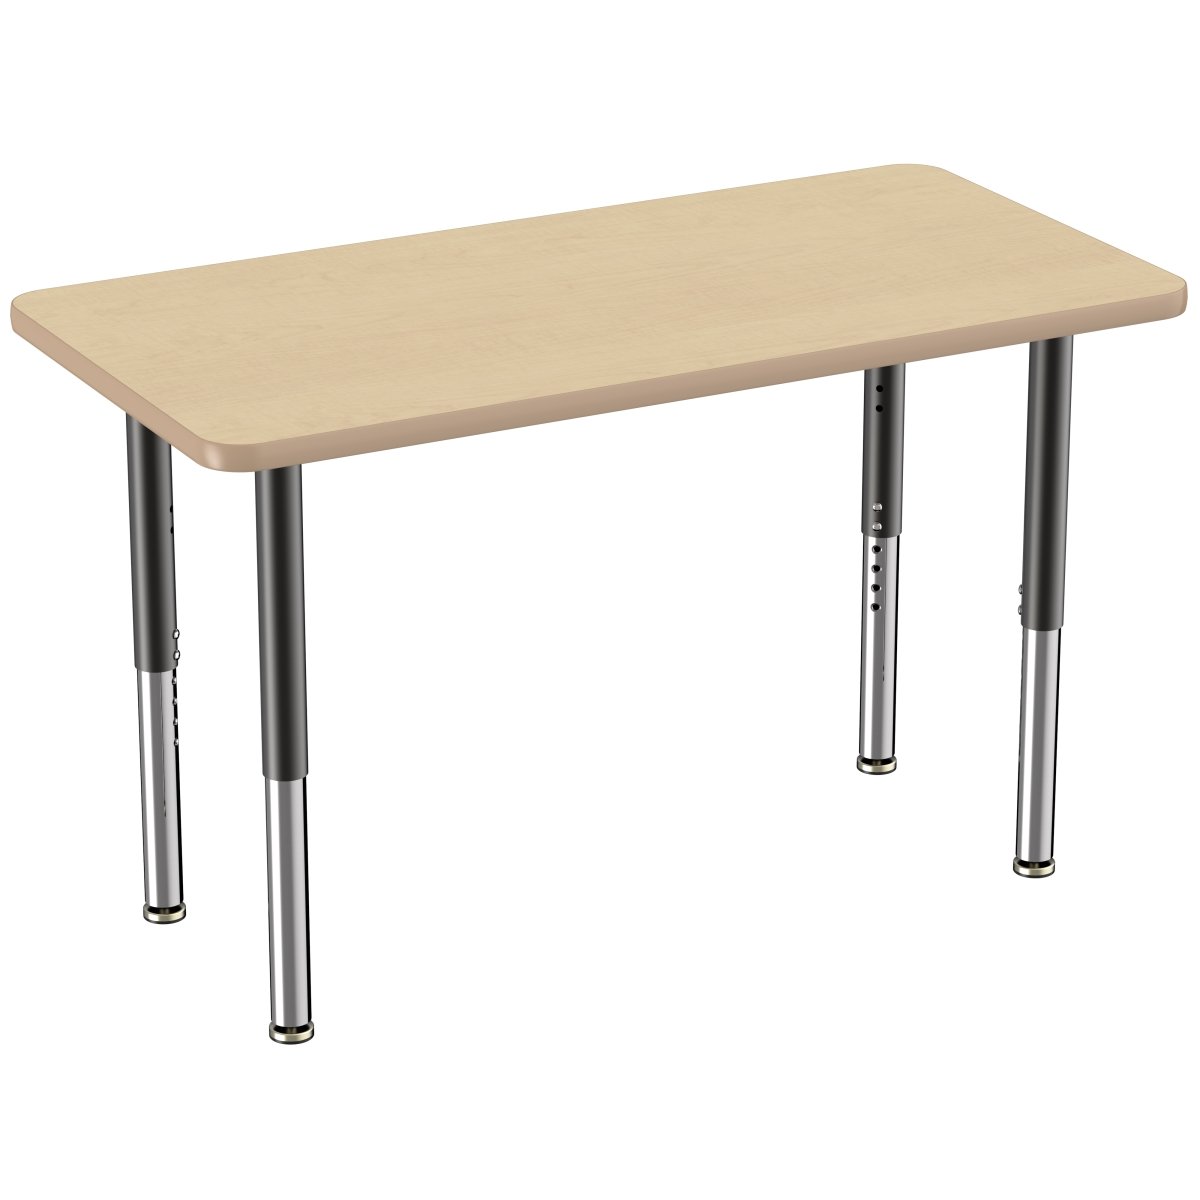 10010-mpmp 24 X 48 In. Rectangle T-mold Adjustable Activity Table With Super Leg - Maple